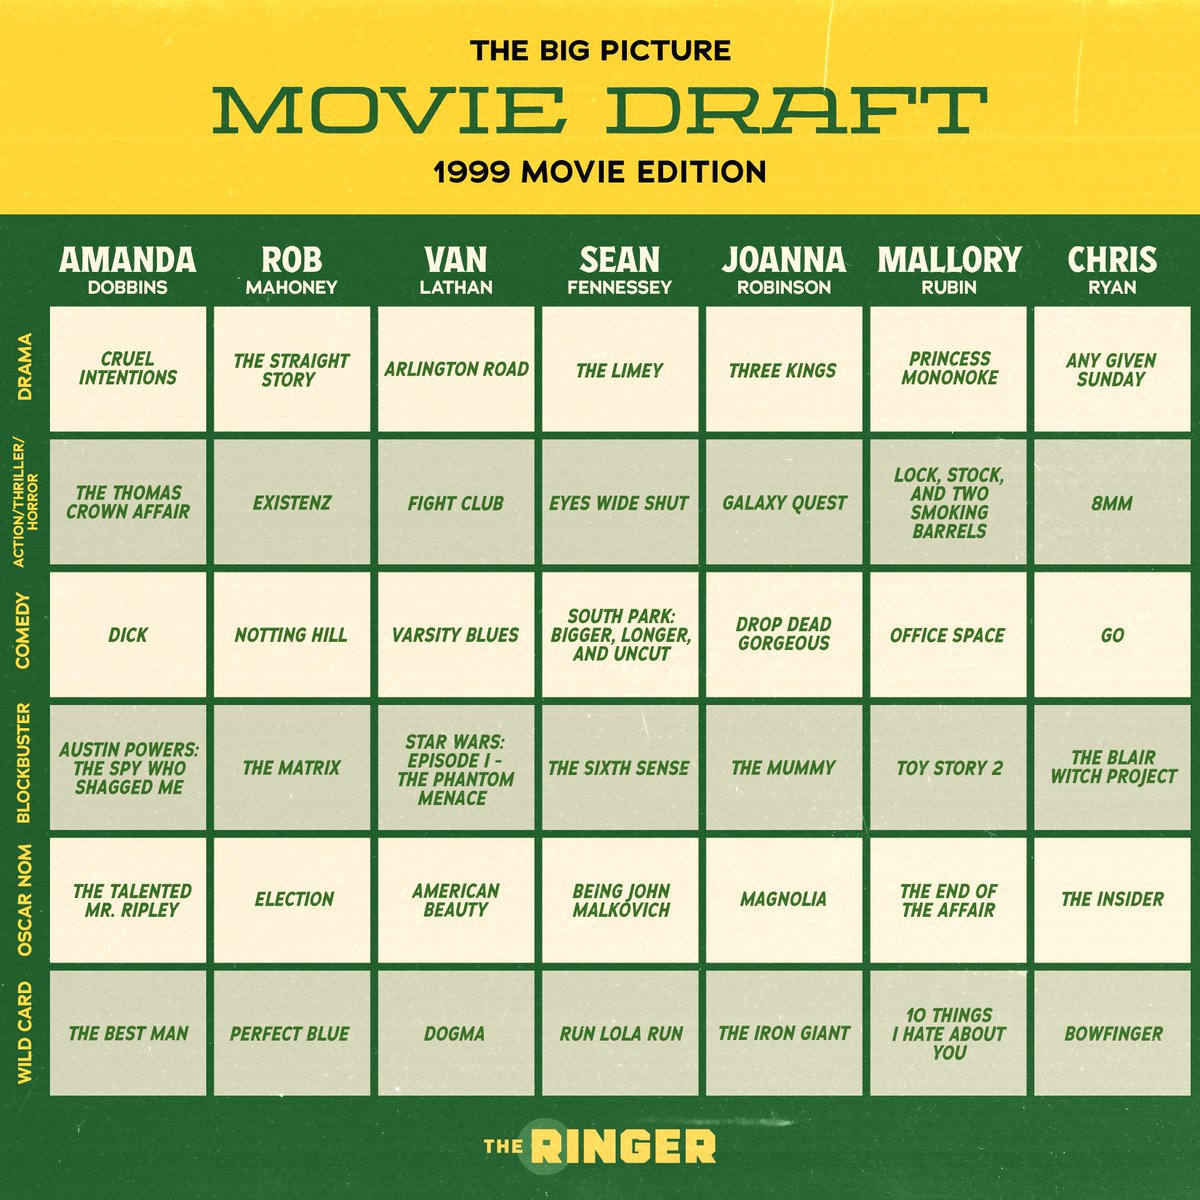 A 7x6 board detailing The Big Picture podcast’s 1999 movie draft. The columns are arranged by the various podcast hosts and guests, and the rows are different categories: drama, action/thriller/horror, comedy, blockbuster, oscar nom, and wild card.